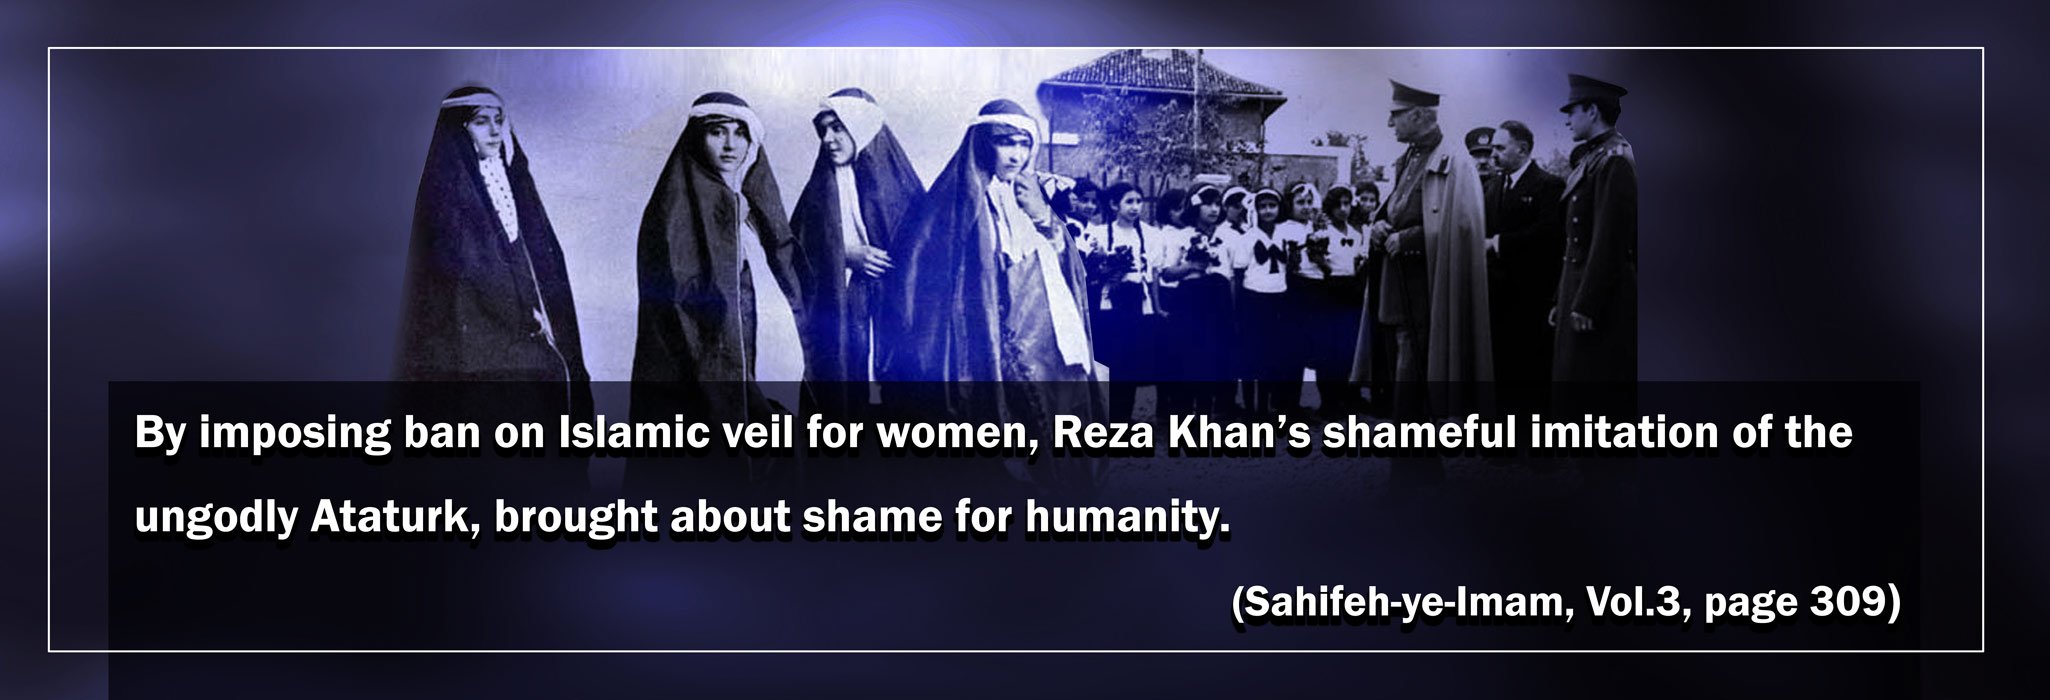 Imam Khomeini strongly denounced imposition of ban on Islamic veil by Pahlavi regime 